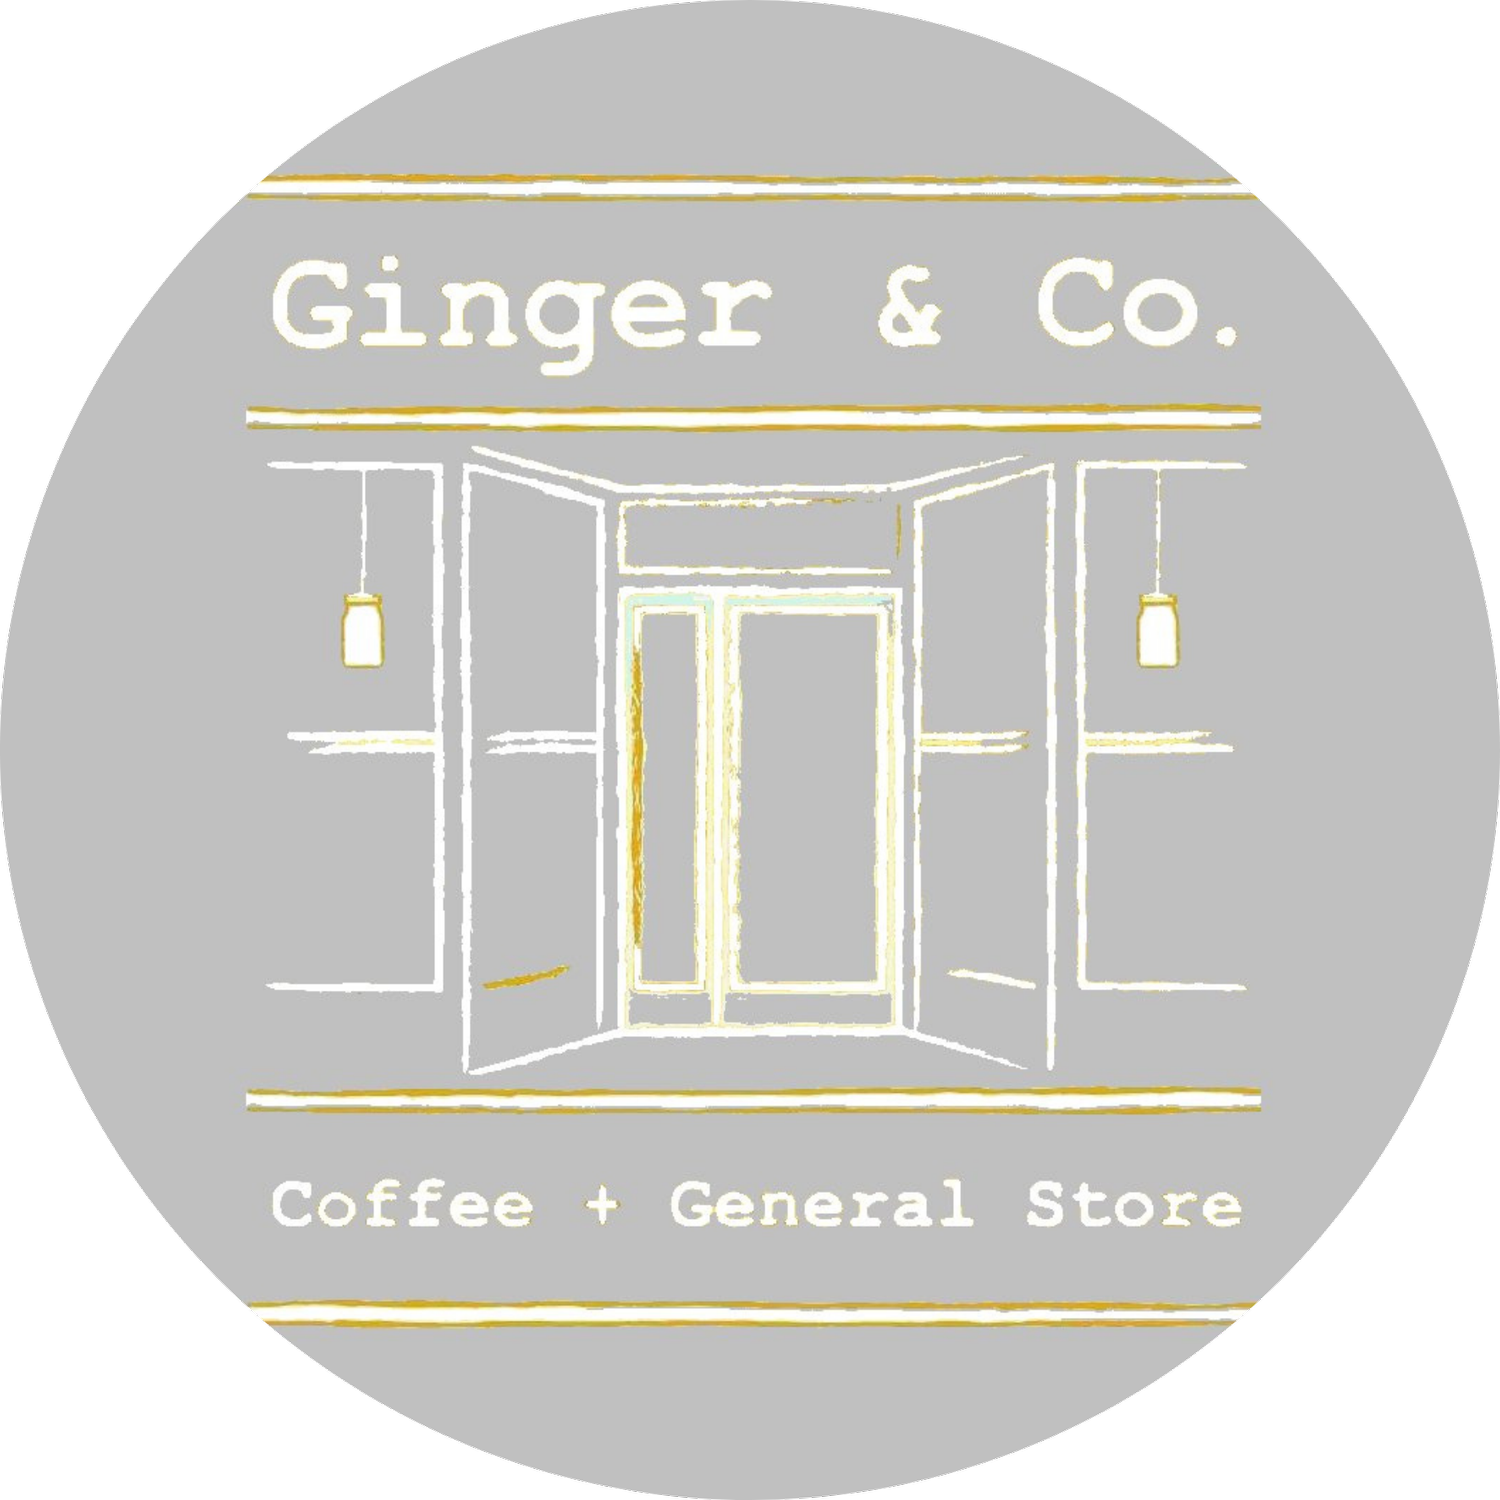 GINGER & CO. COFFEE SHOP